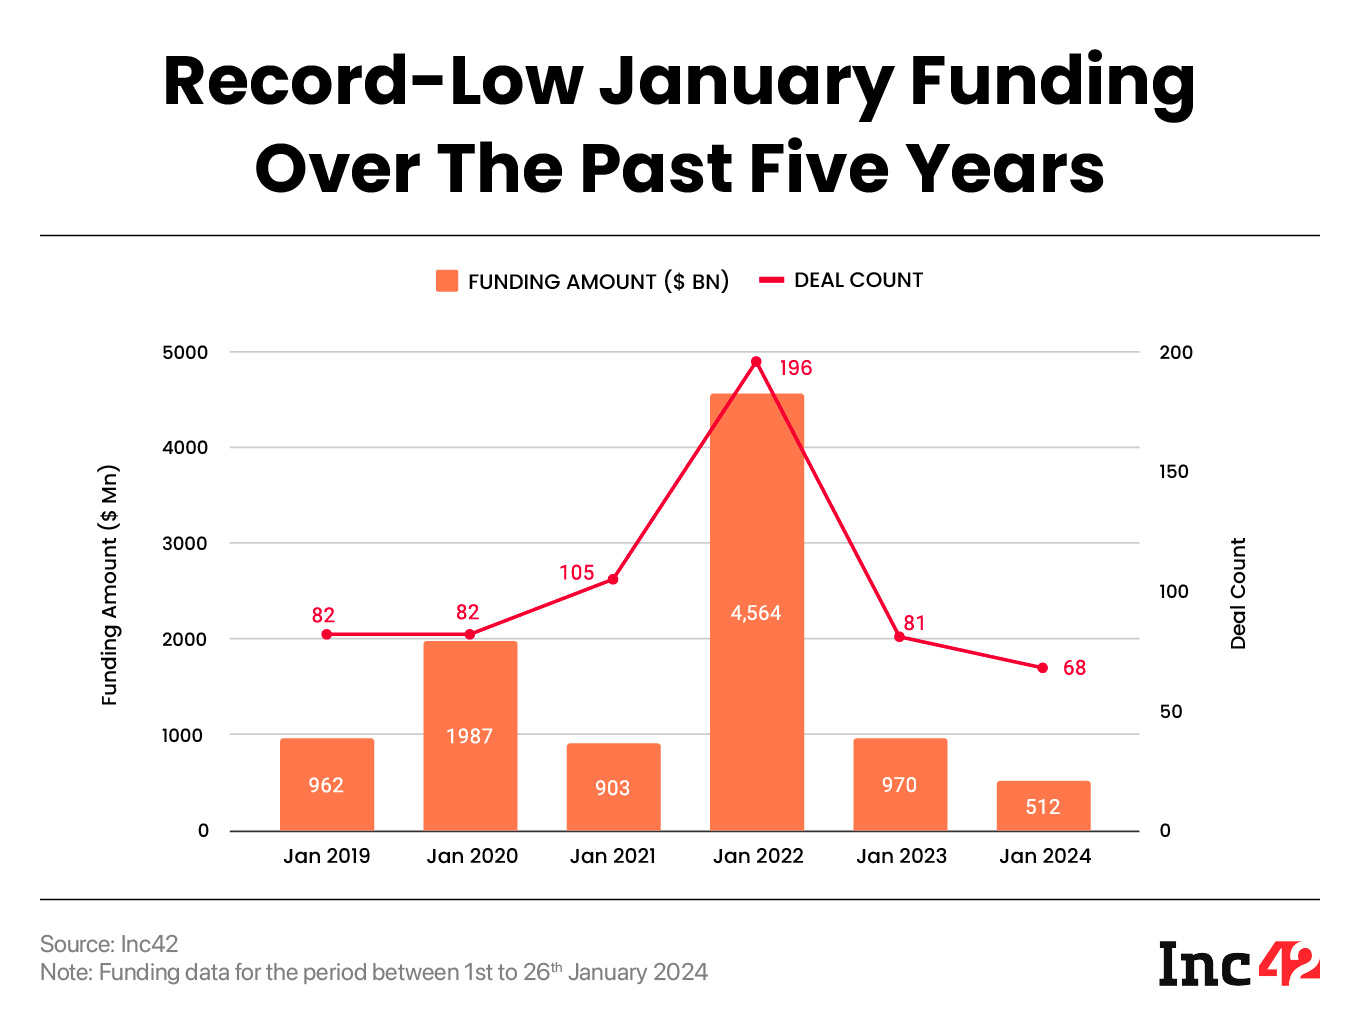 Record low January funding over the past five years